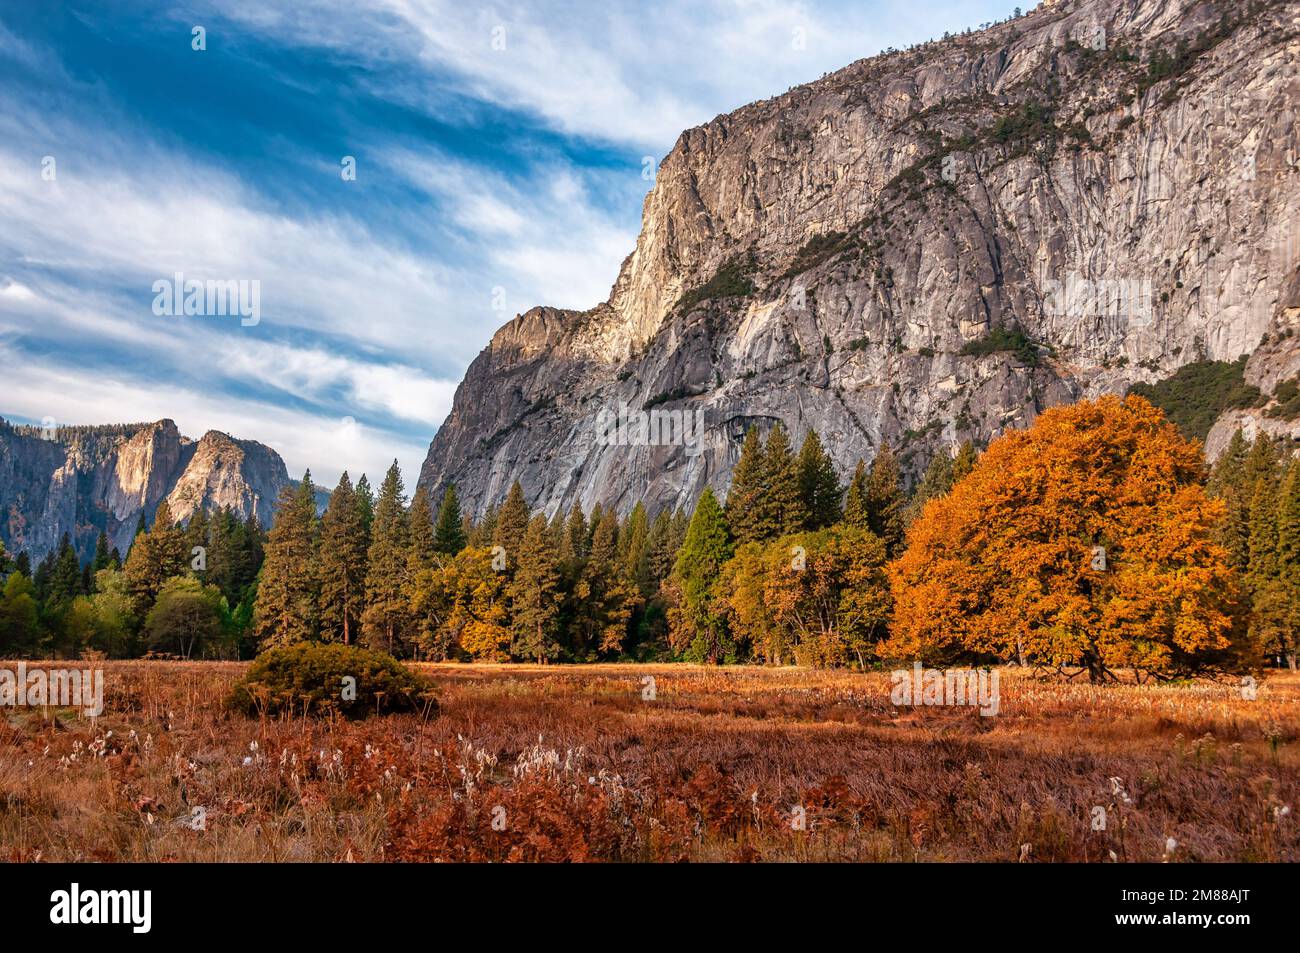 An autumn morning in Yosemite Valley at Yosemite National Park in California. Stock Photo